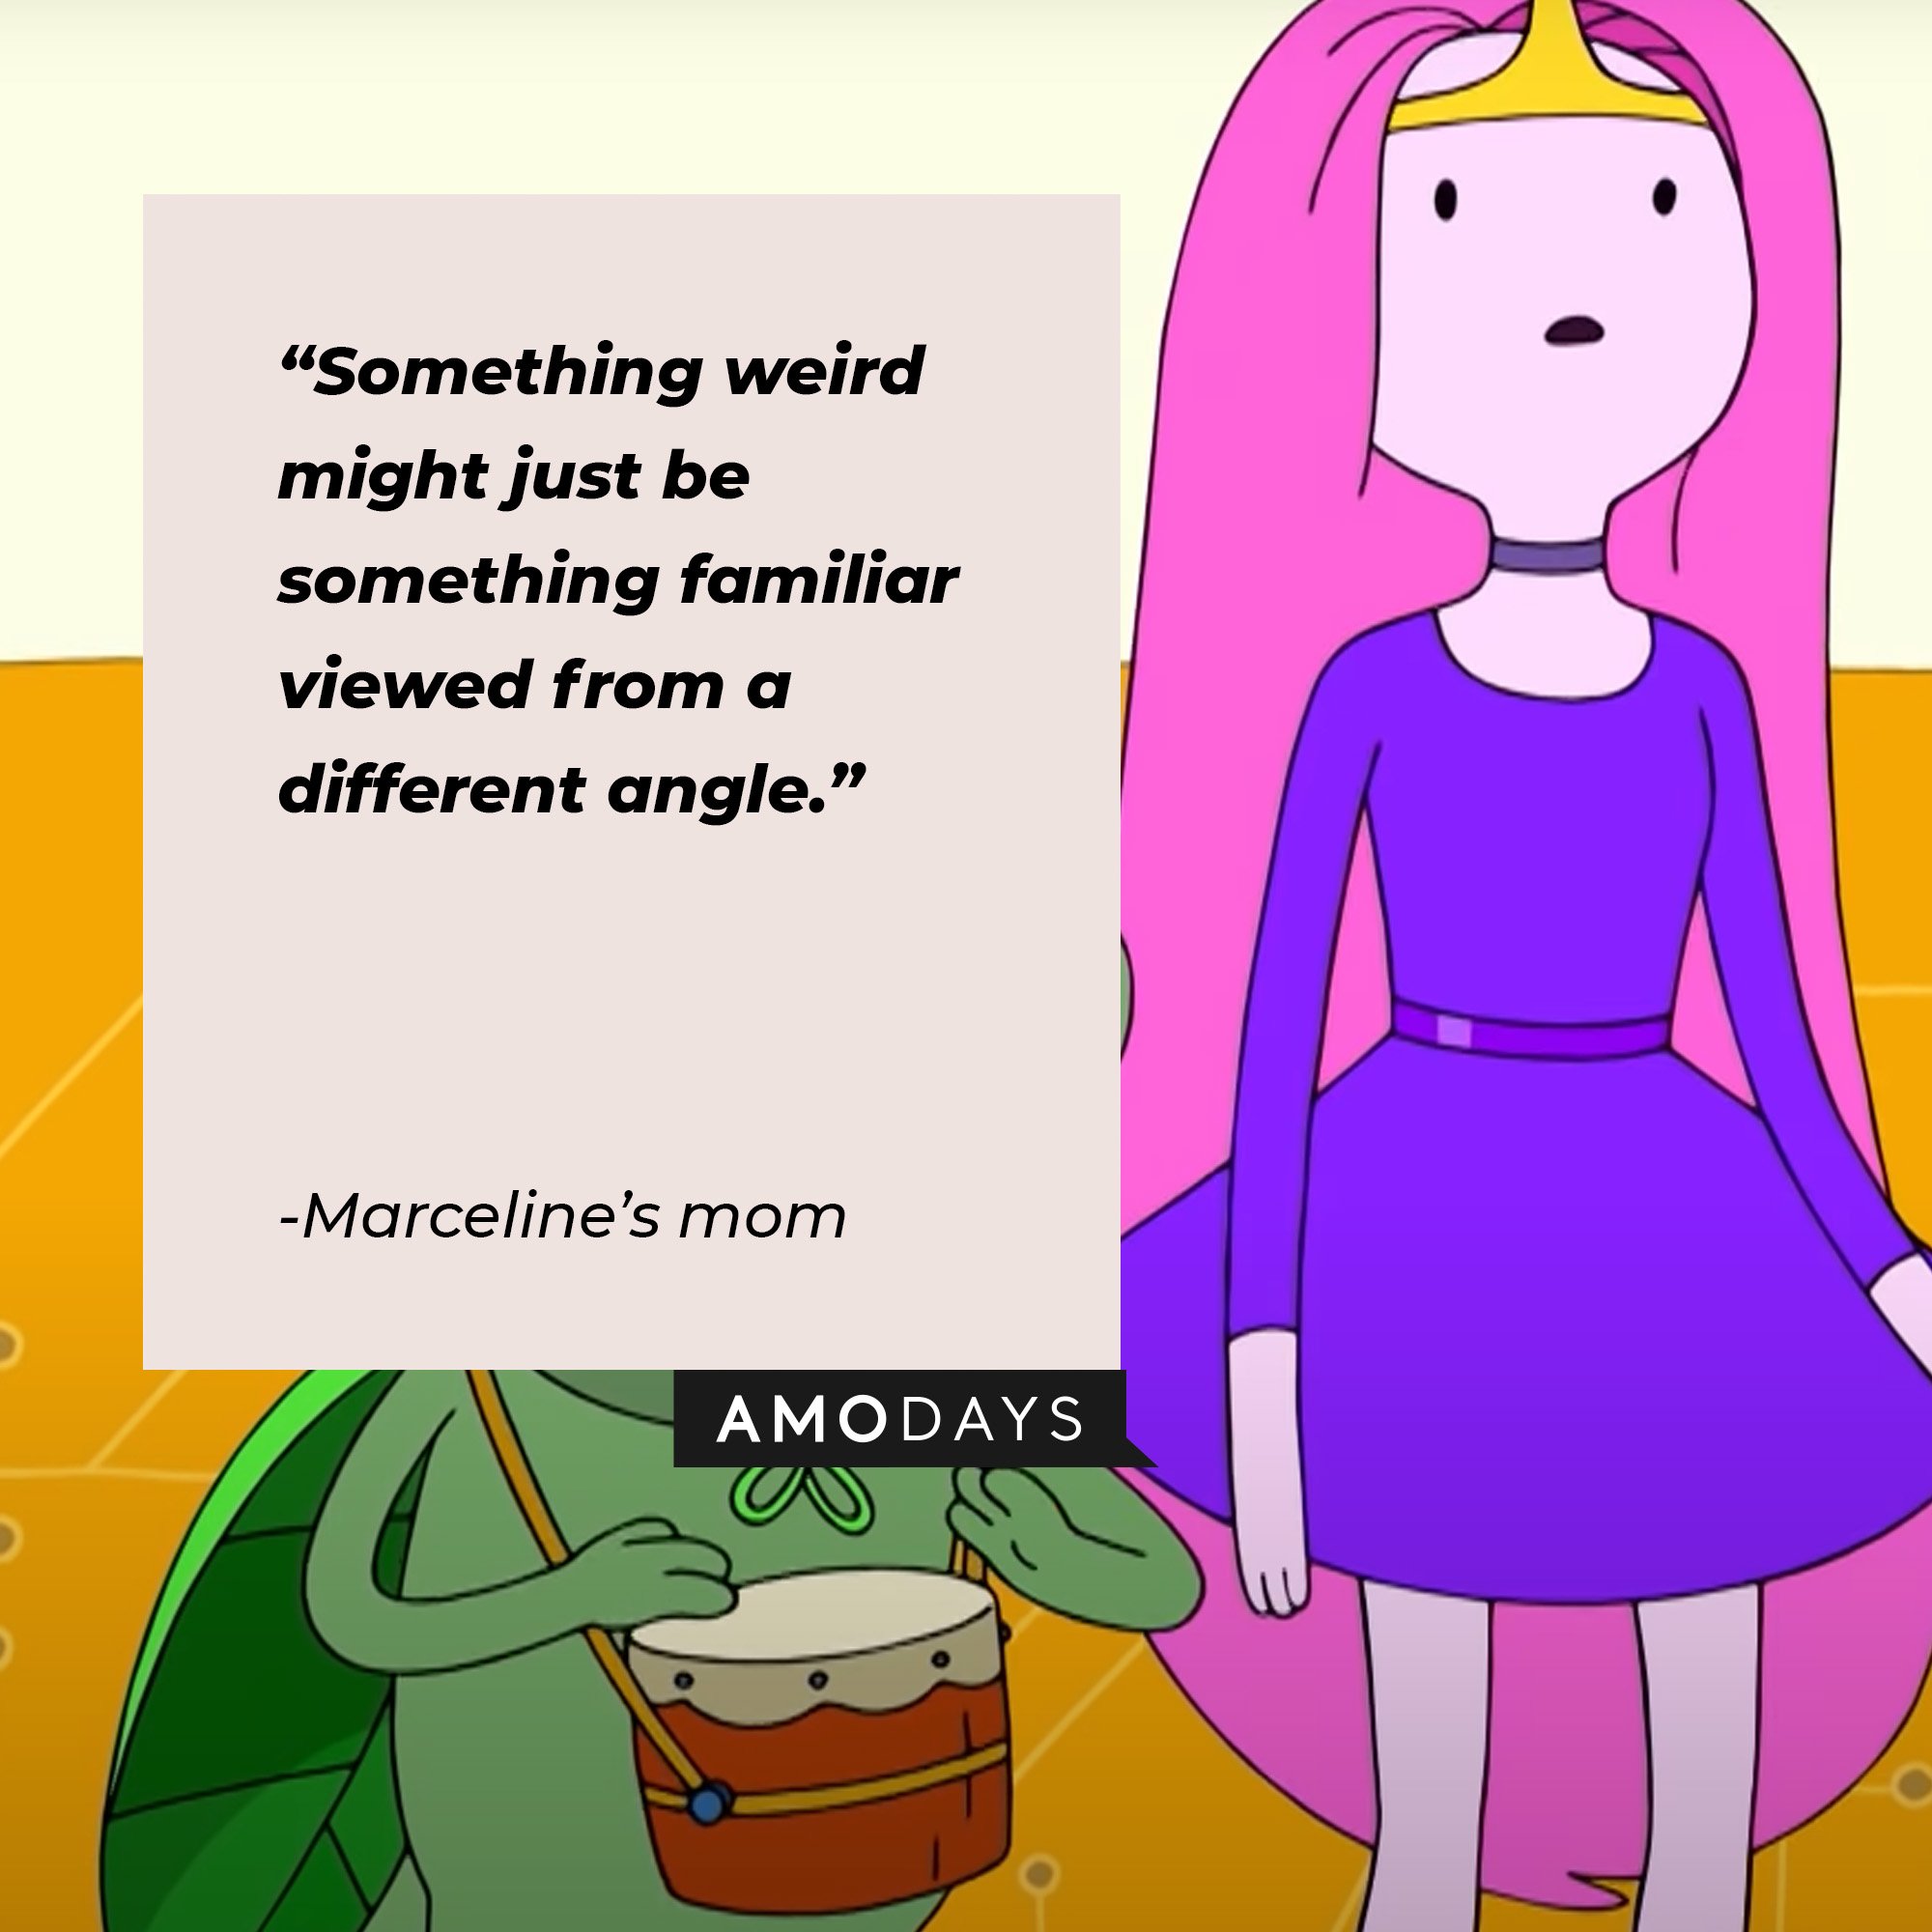  Marceline’s mom's quote: “Something weird might just be something familiar viewed from a different angle.” |  Image: AmoDays